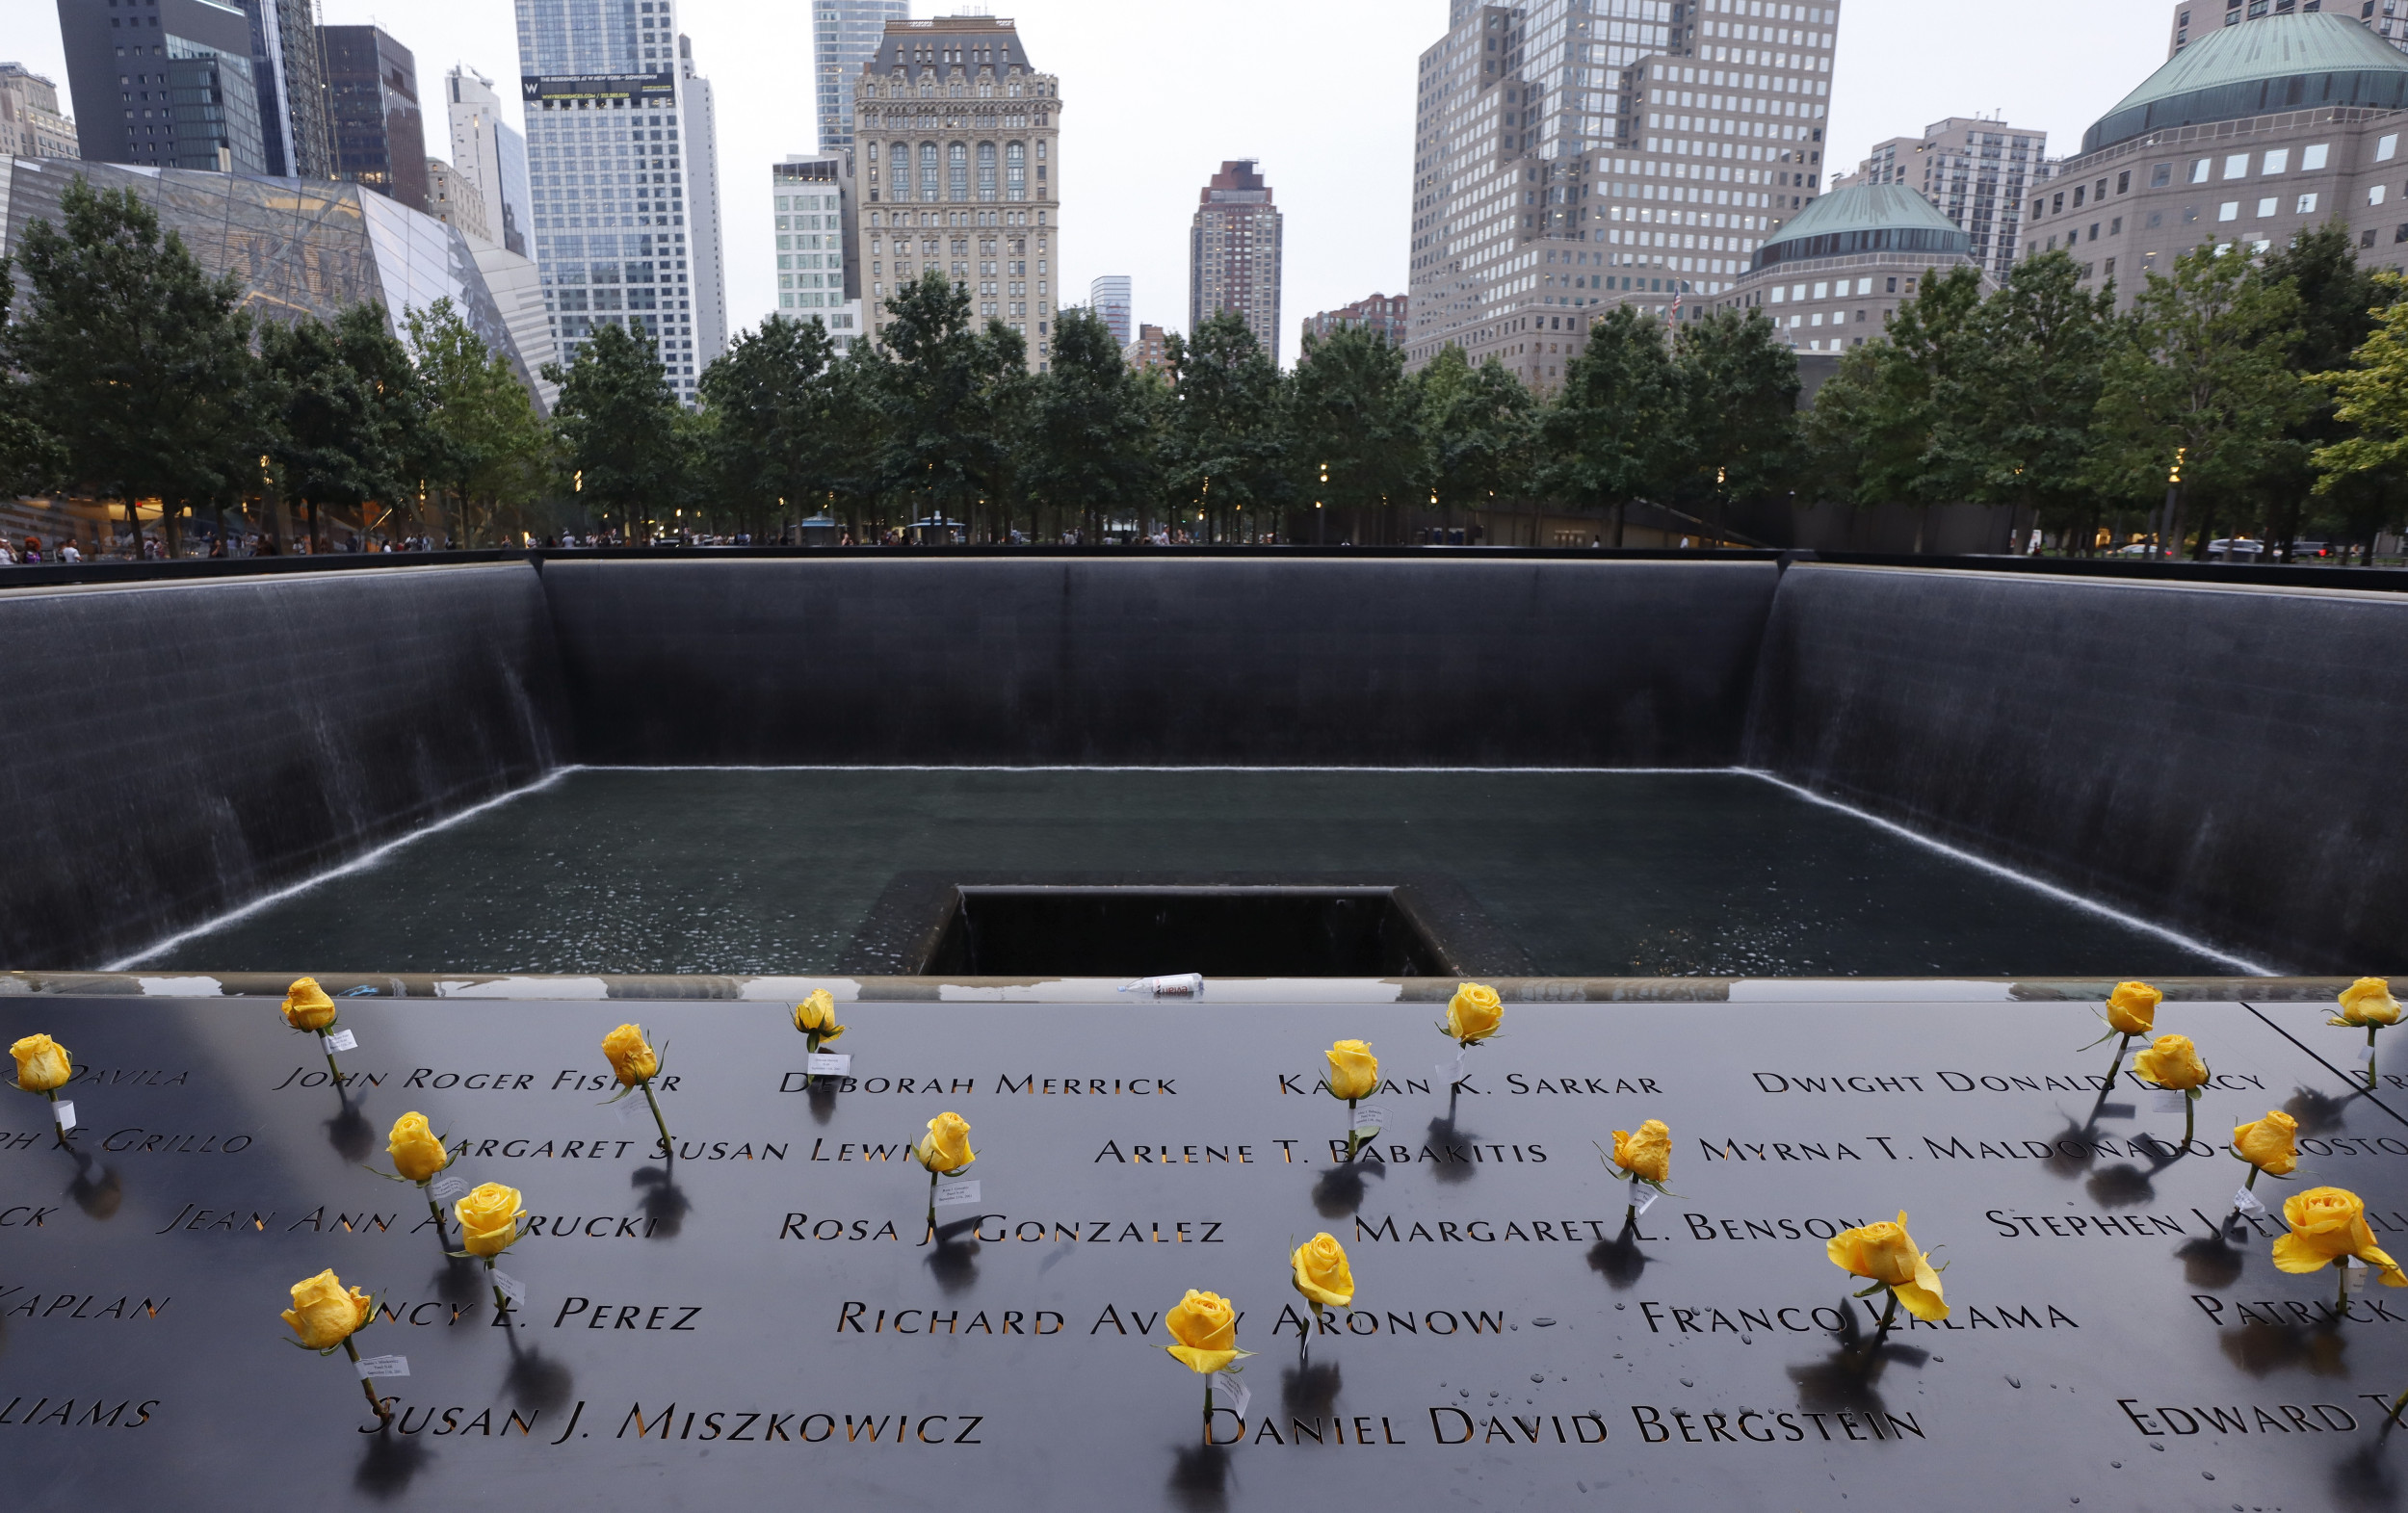 September 11 Tribute: How to Watch World Trade Center, 9/11 Documentaries